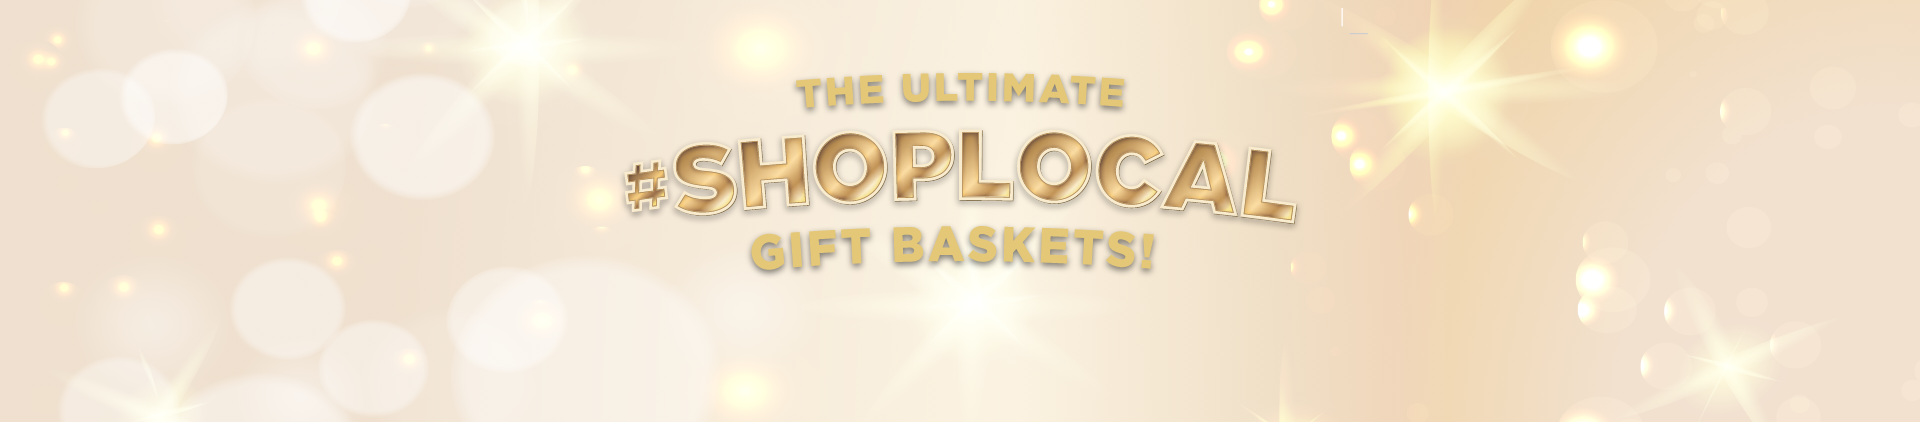 The Ultimate ShopLocal Gift Baskets